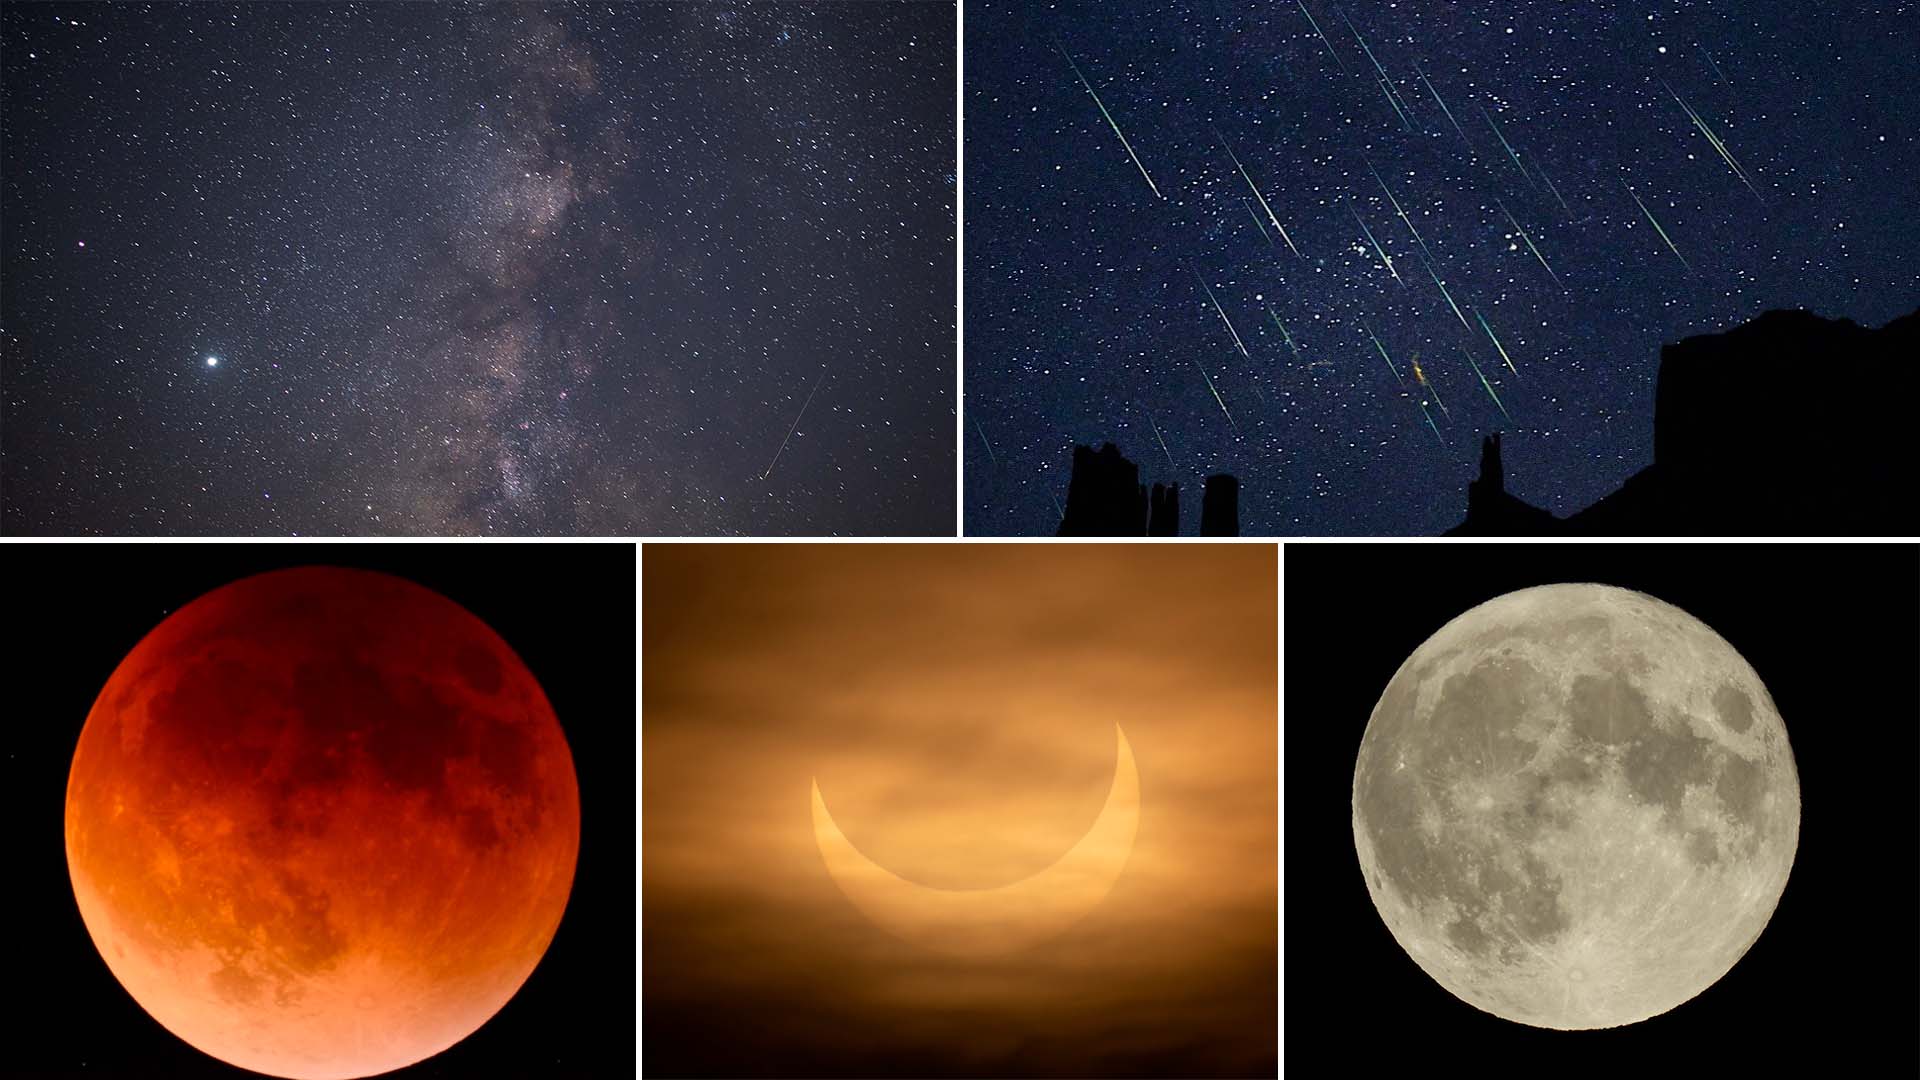 Partial solar eclipse and meteor showers, the October sky